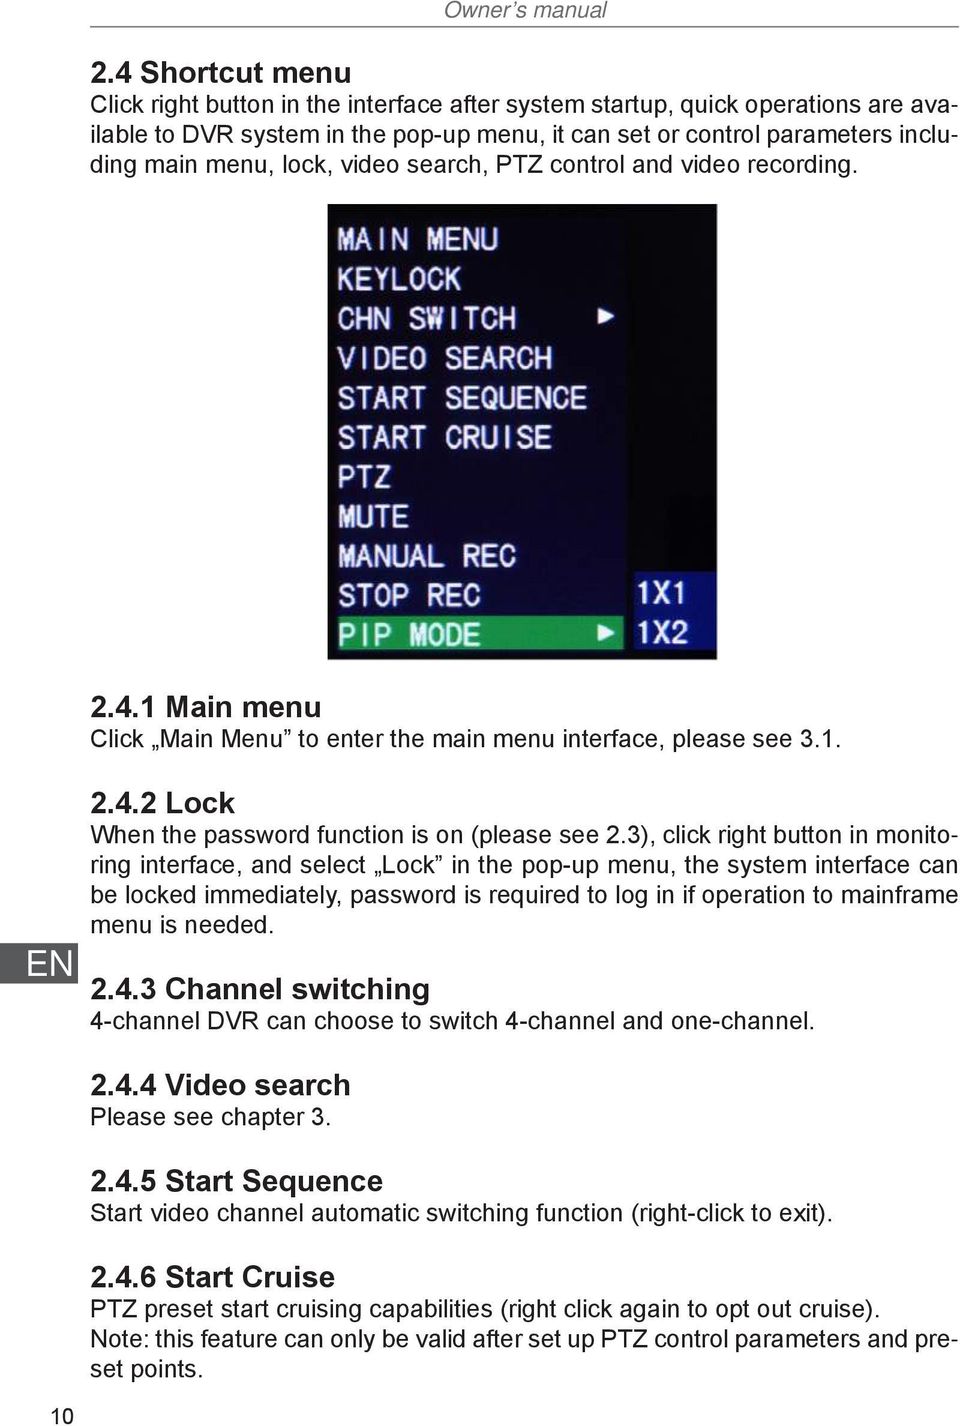 video search, PTZ control and video recording. 2.4.1 Main menu Click Main Menu to enter the main menu interface, please see 3.1. EN 2.4.2 Lock When the password function is on (please see 2.